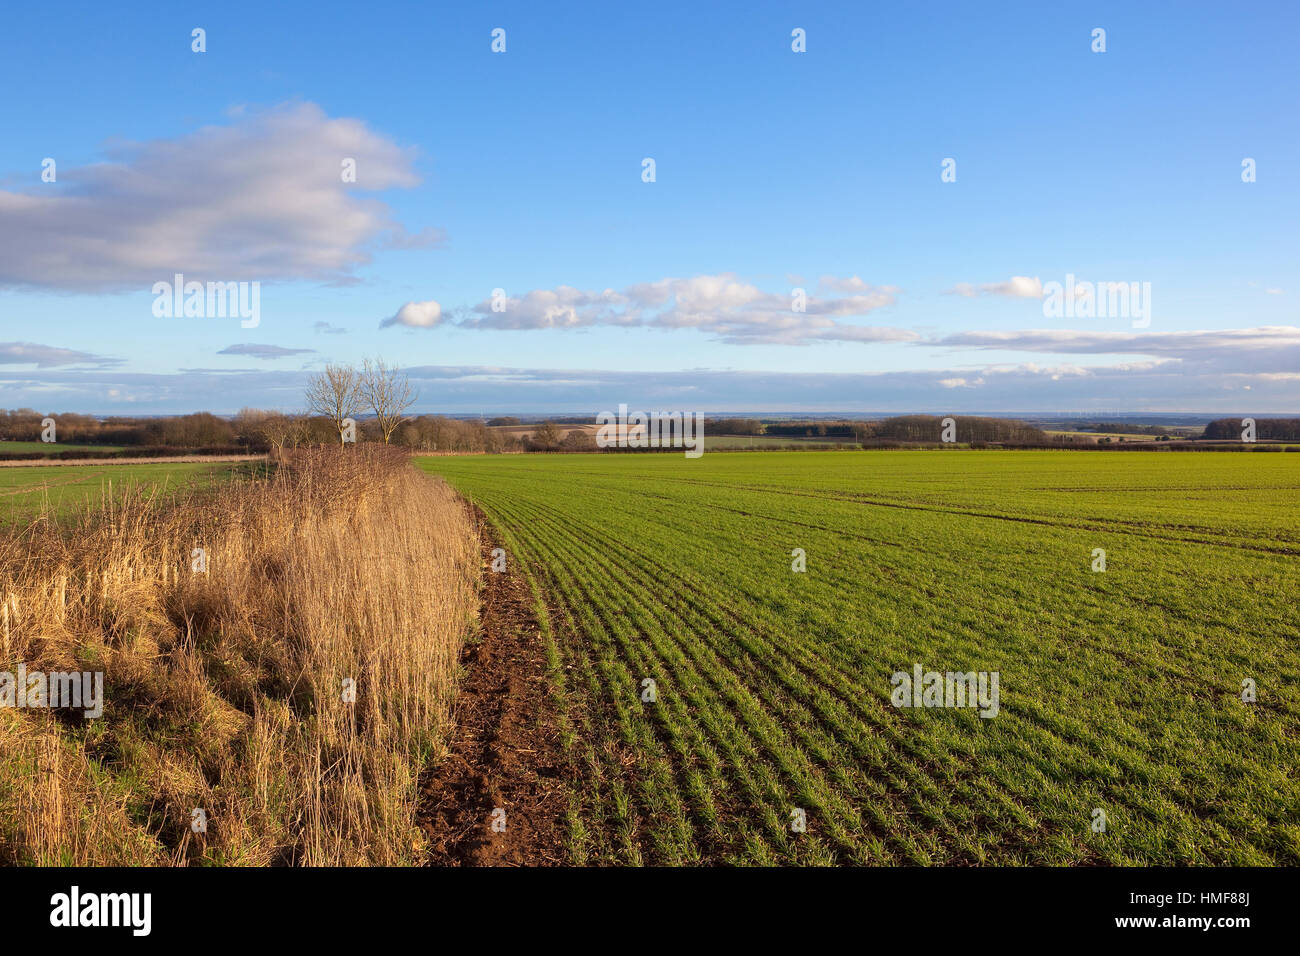 Young cereal plants with dry grasses and trees in a Yorkshire wolds landscape under a blue cloudy sky in winter Stock Photo